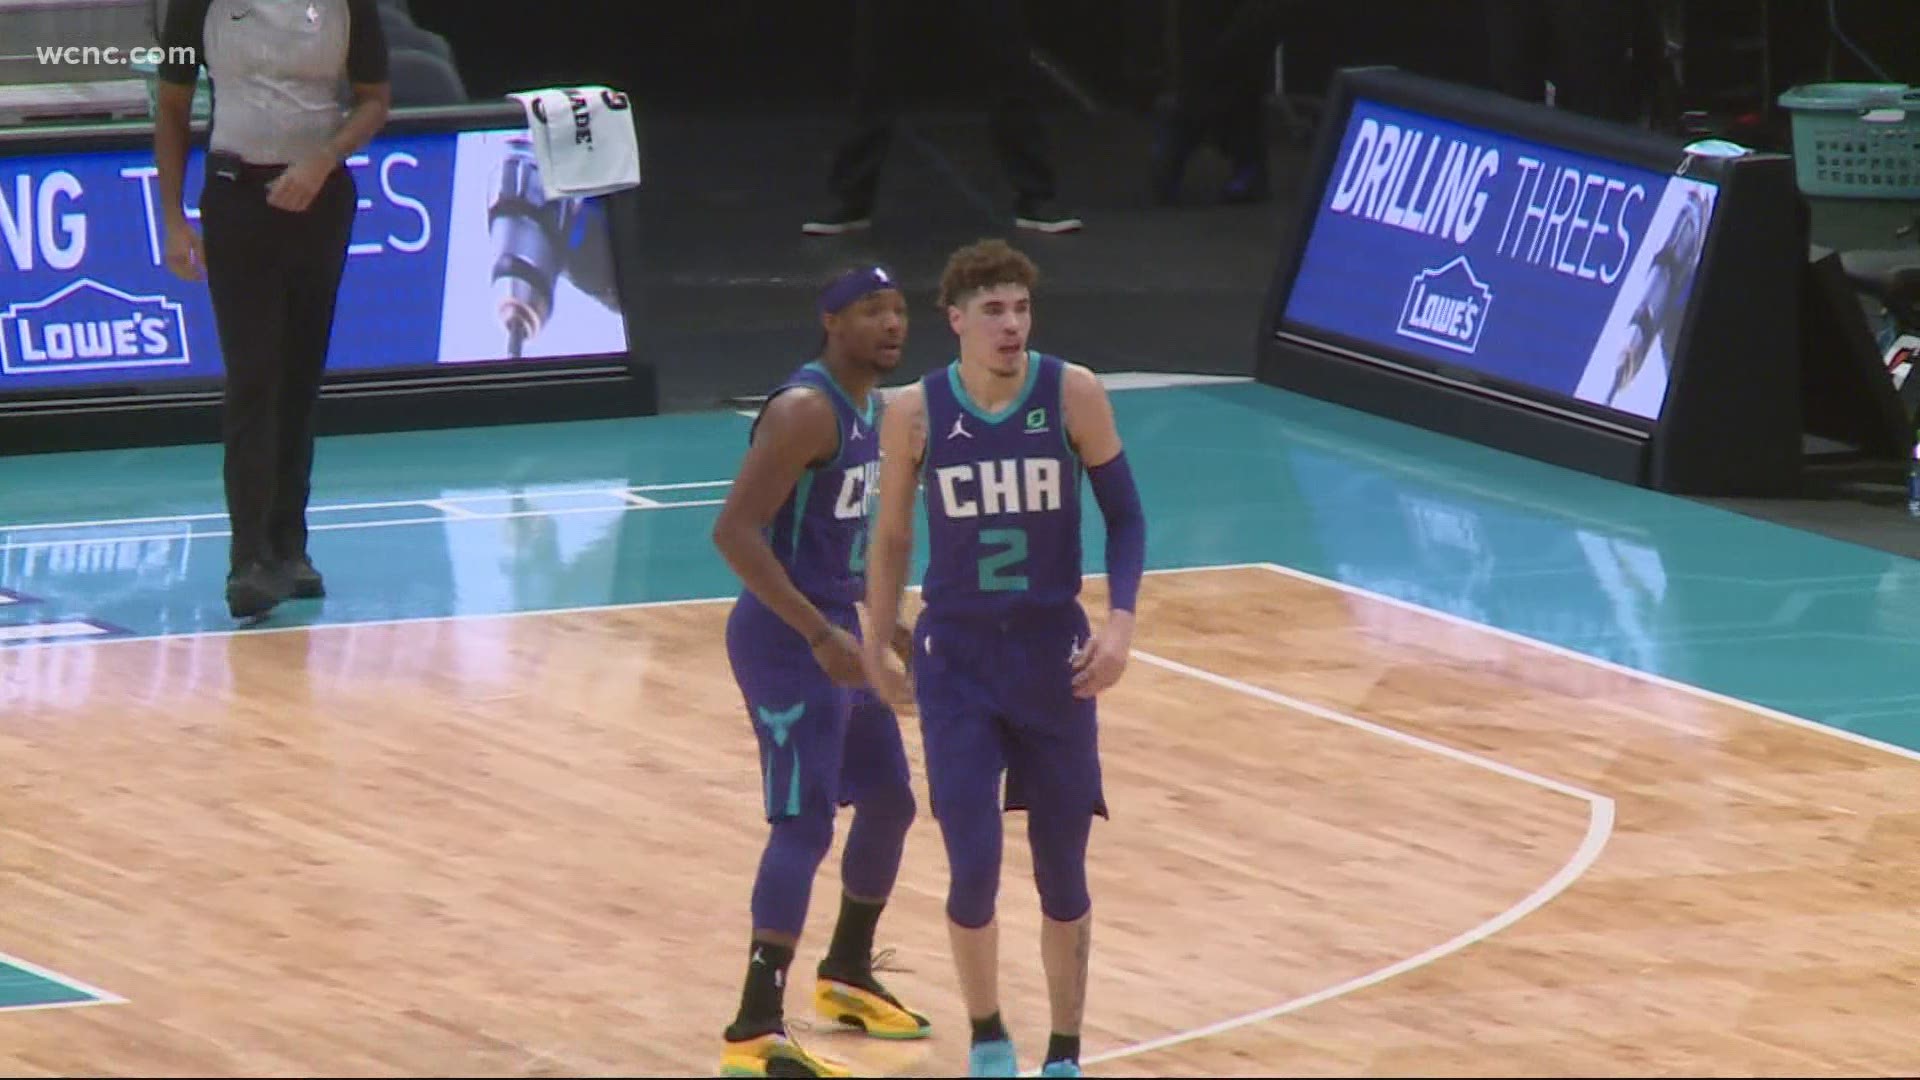 The Charlotte Hornets picked up their second straight win Saturday night, beating the Milwaukee Bucks thanks to a career game from rookie LaMelo Ball.